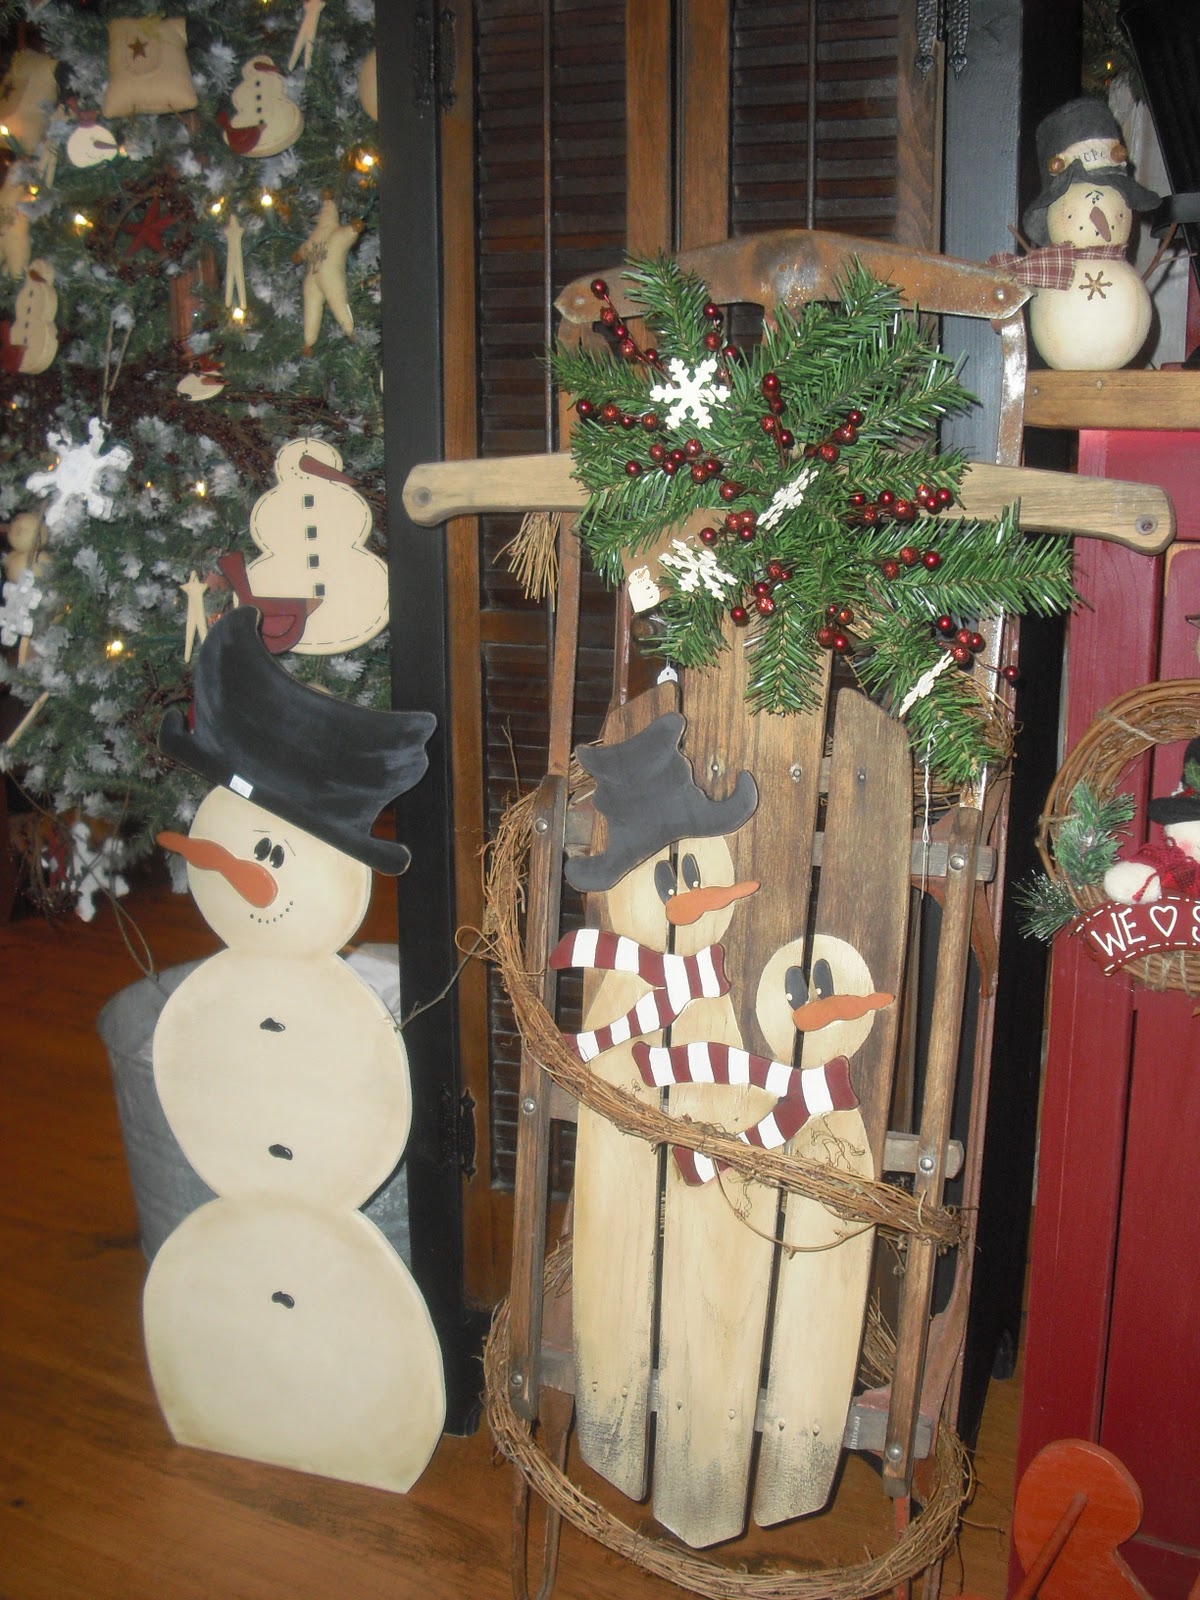 C & C Furnishings: Primtive and Country Christmas Decor